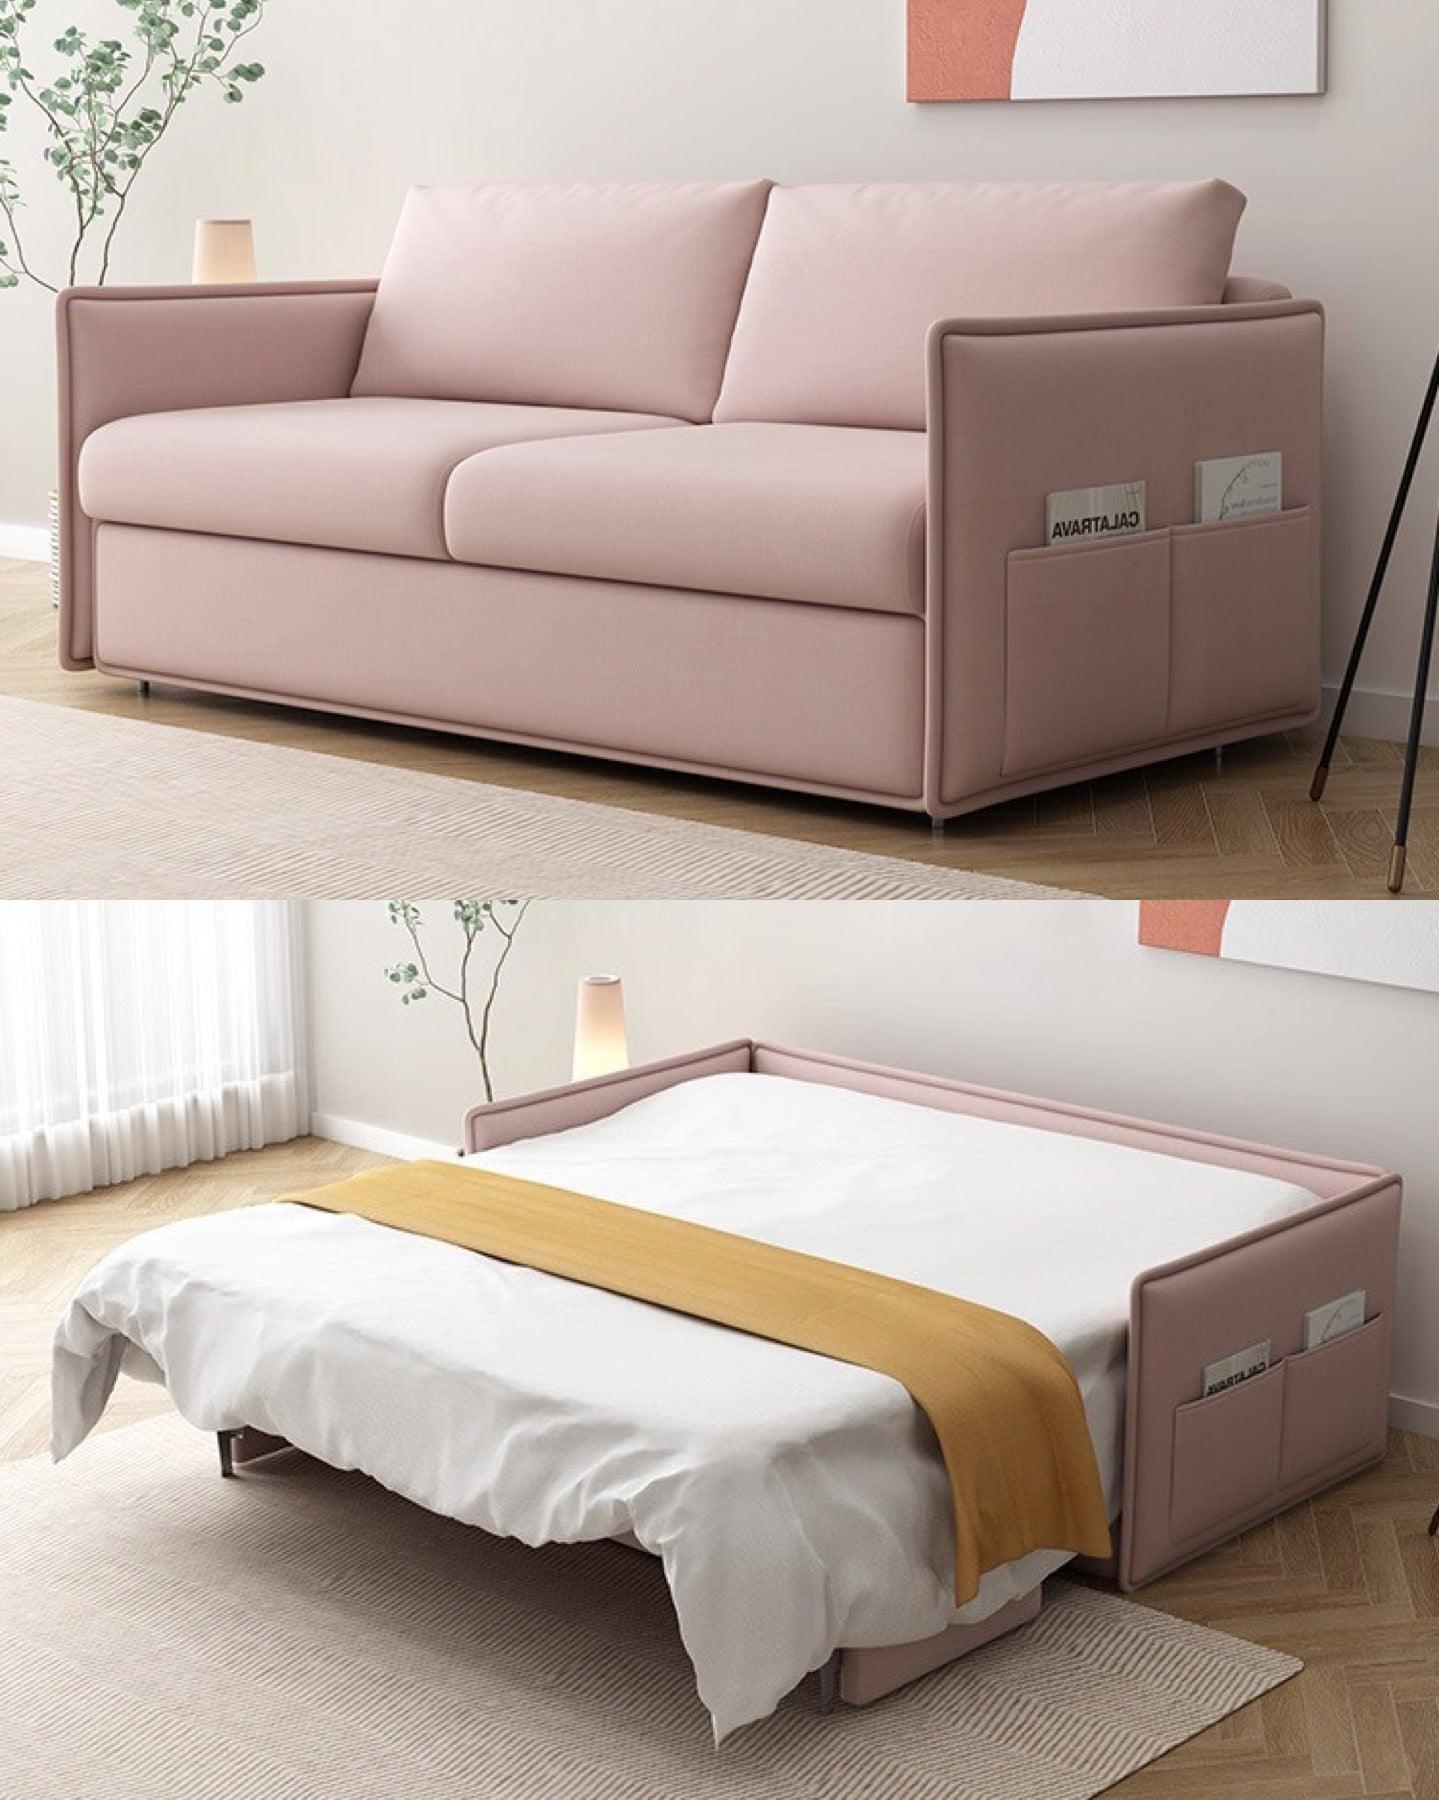 Home Atelier Cotton Linen Fabric / Single Size/ Length 136cm / Pink Ariel Foldable Sofa Bed with Mattress